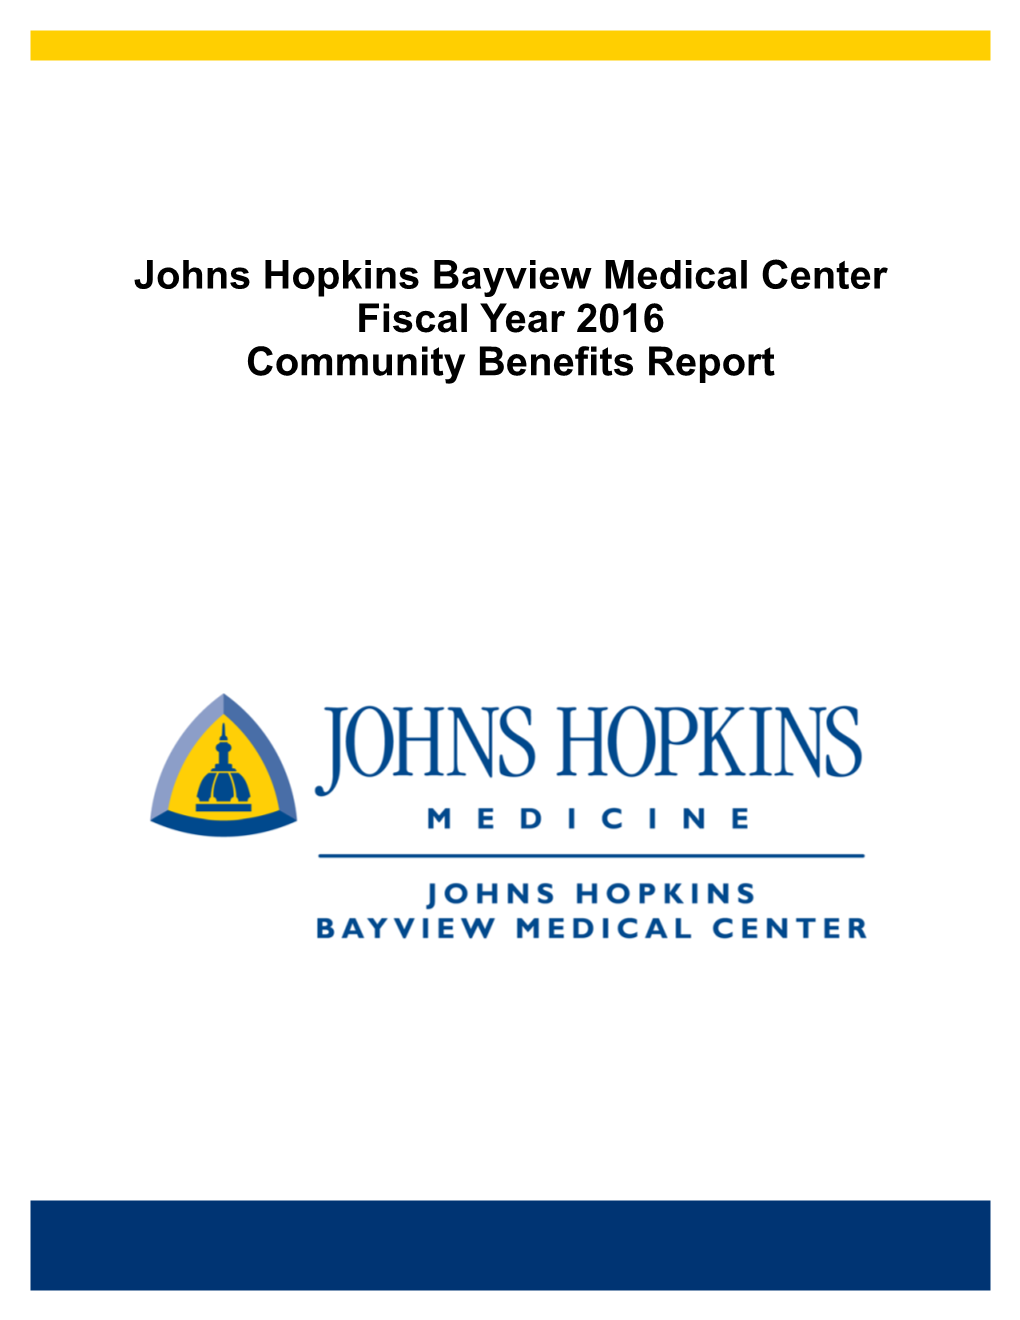 Johns Hopkins Bayview Medical Center Fiscal Year 2016 Community Benefits Report